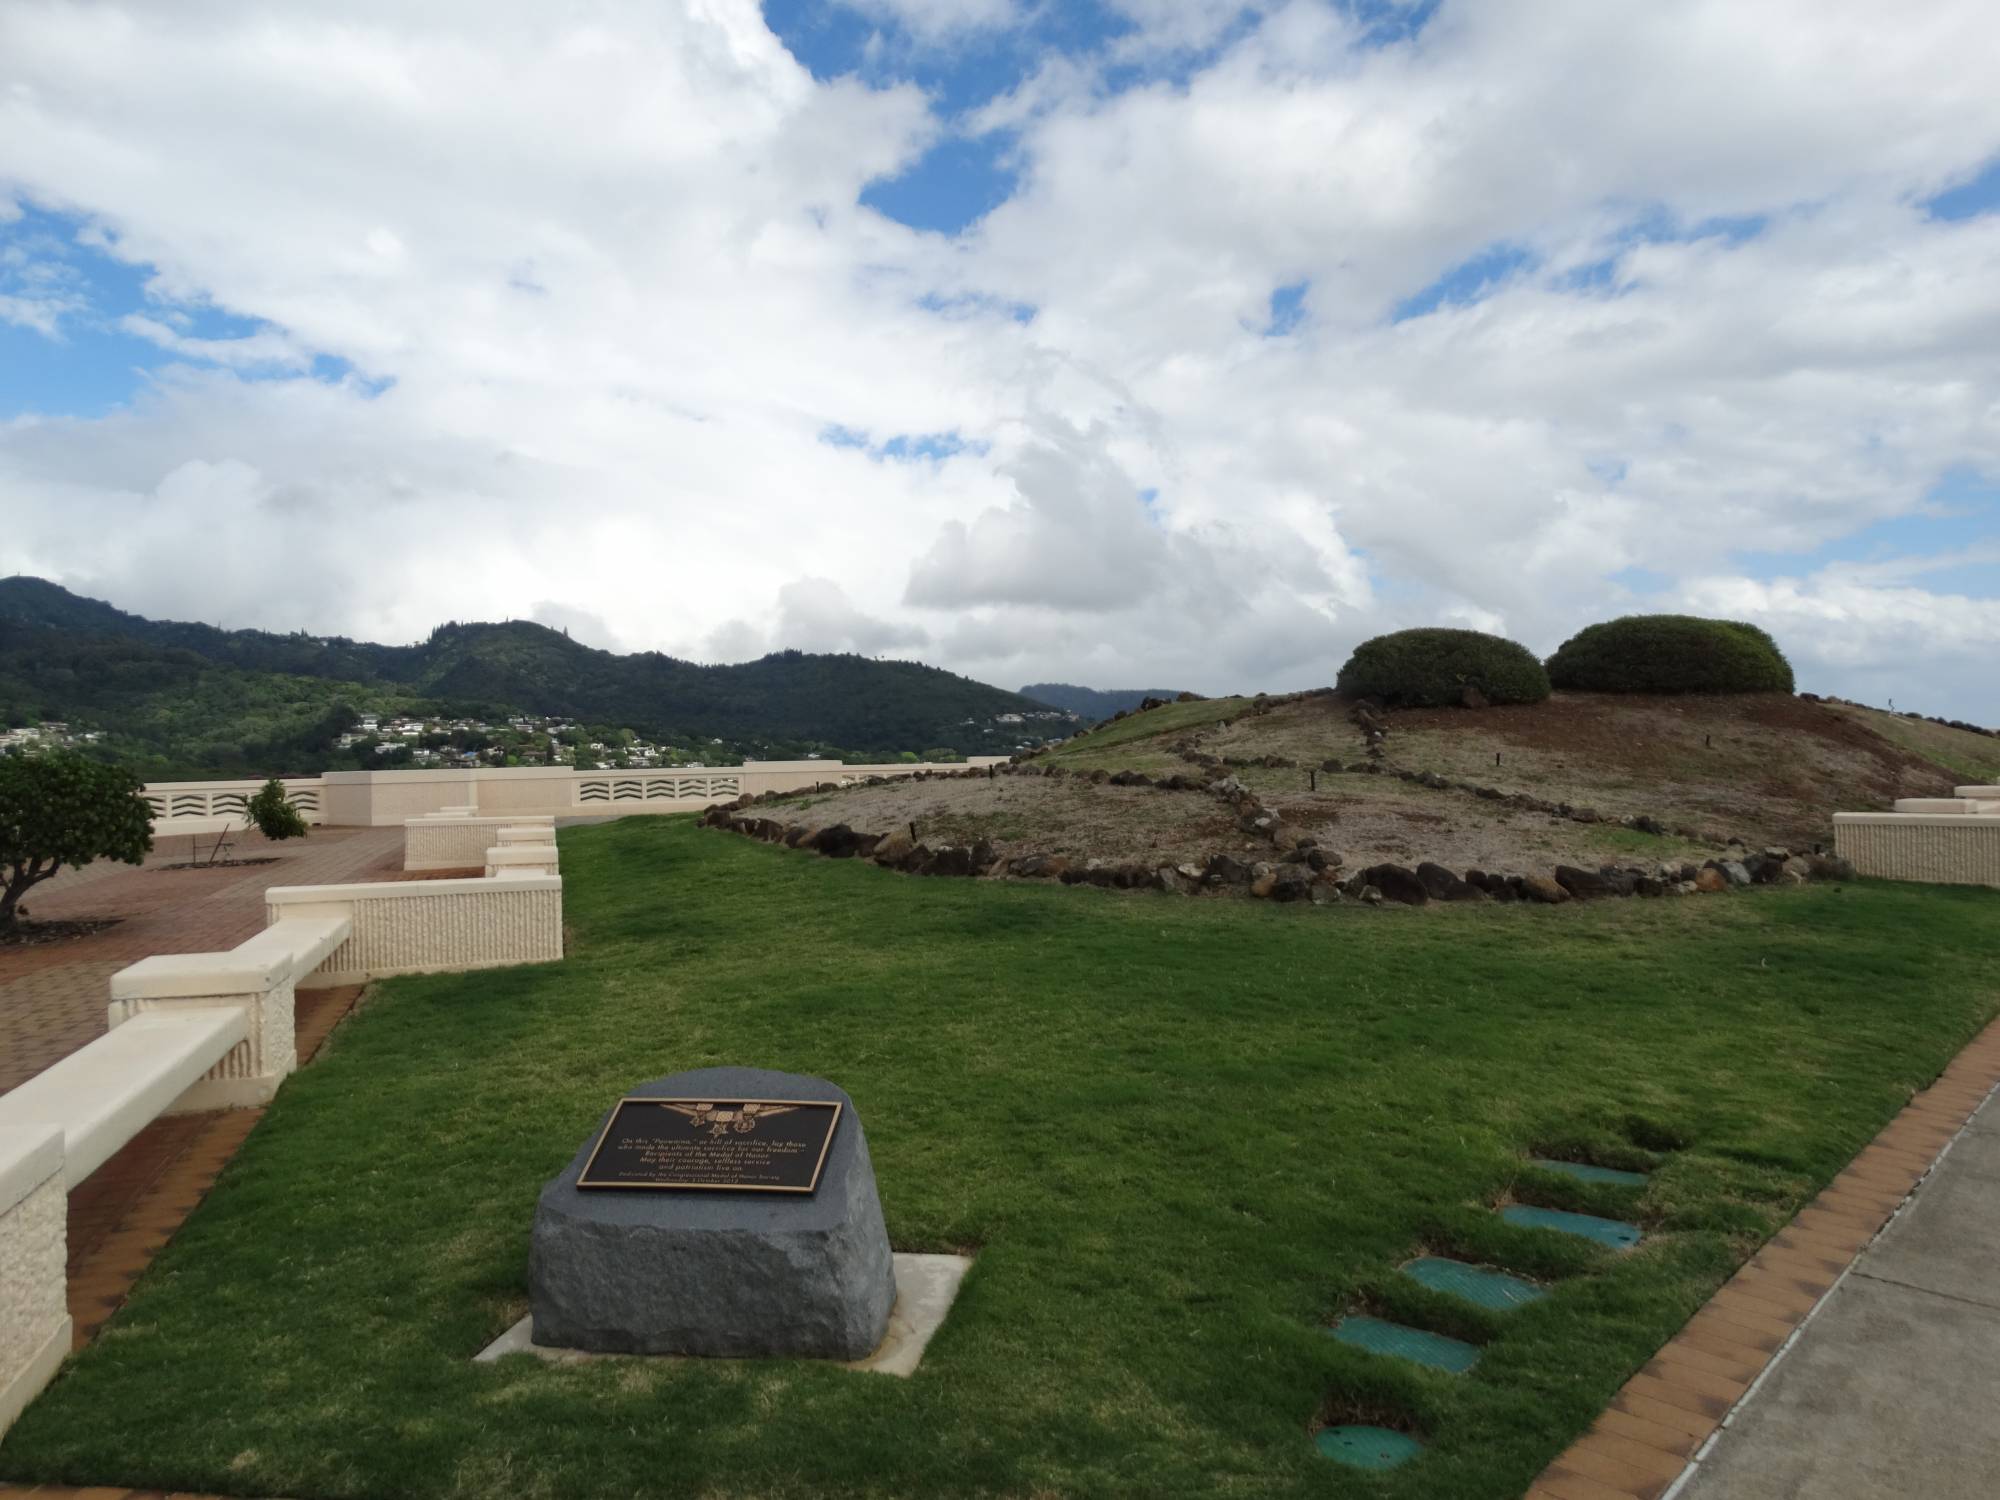 Honolulu - National Memorial Cemetery of the Pacific